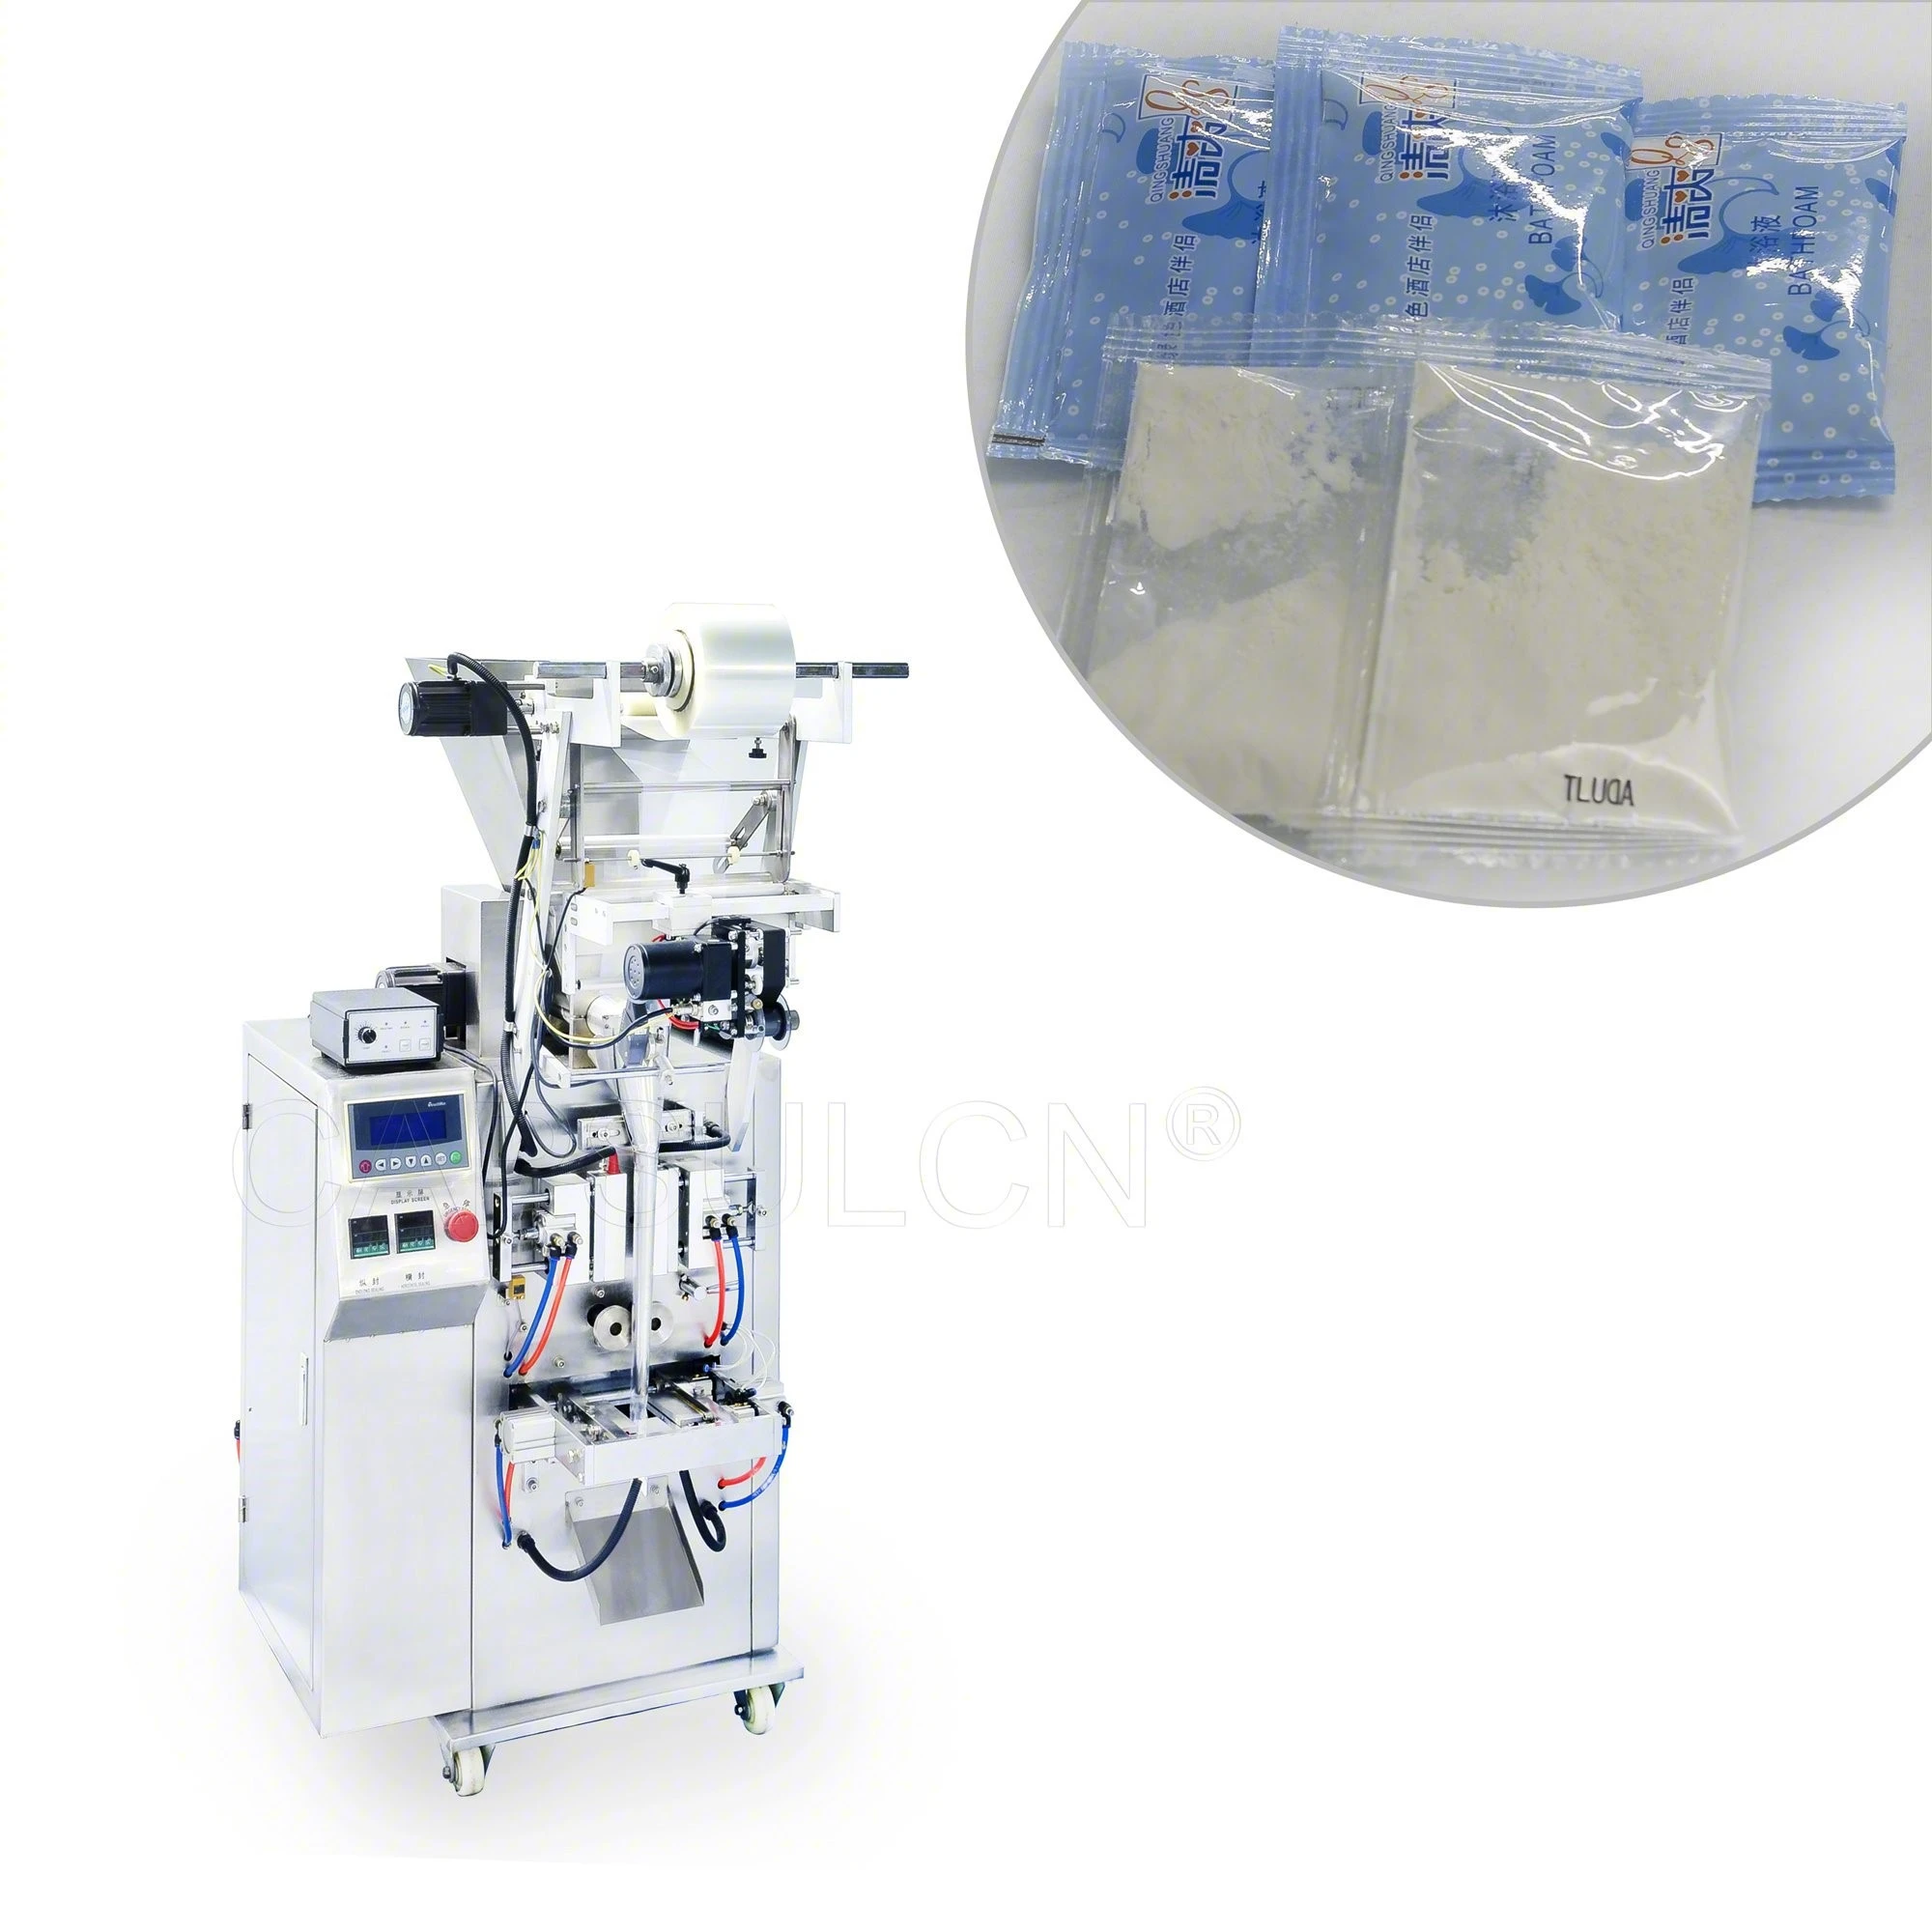 DXDF-300 Manual Bleaching Detergent Soap Powder Filling Packing Machine